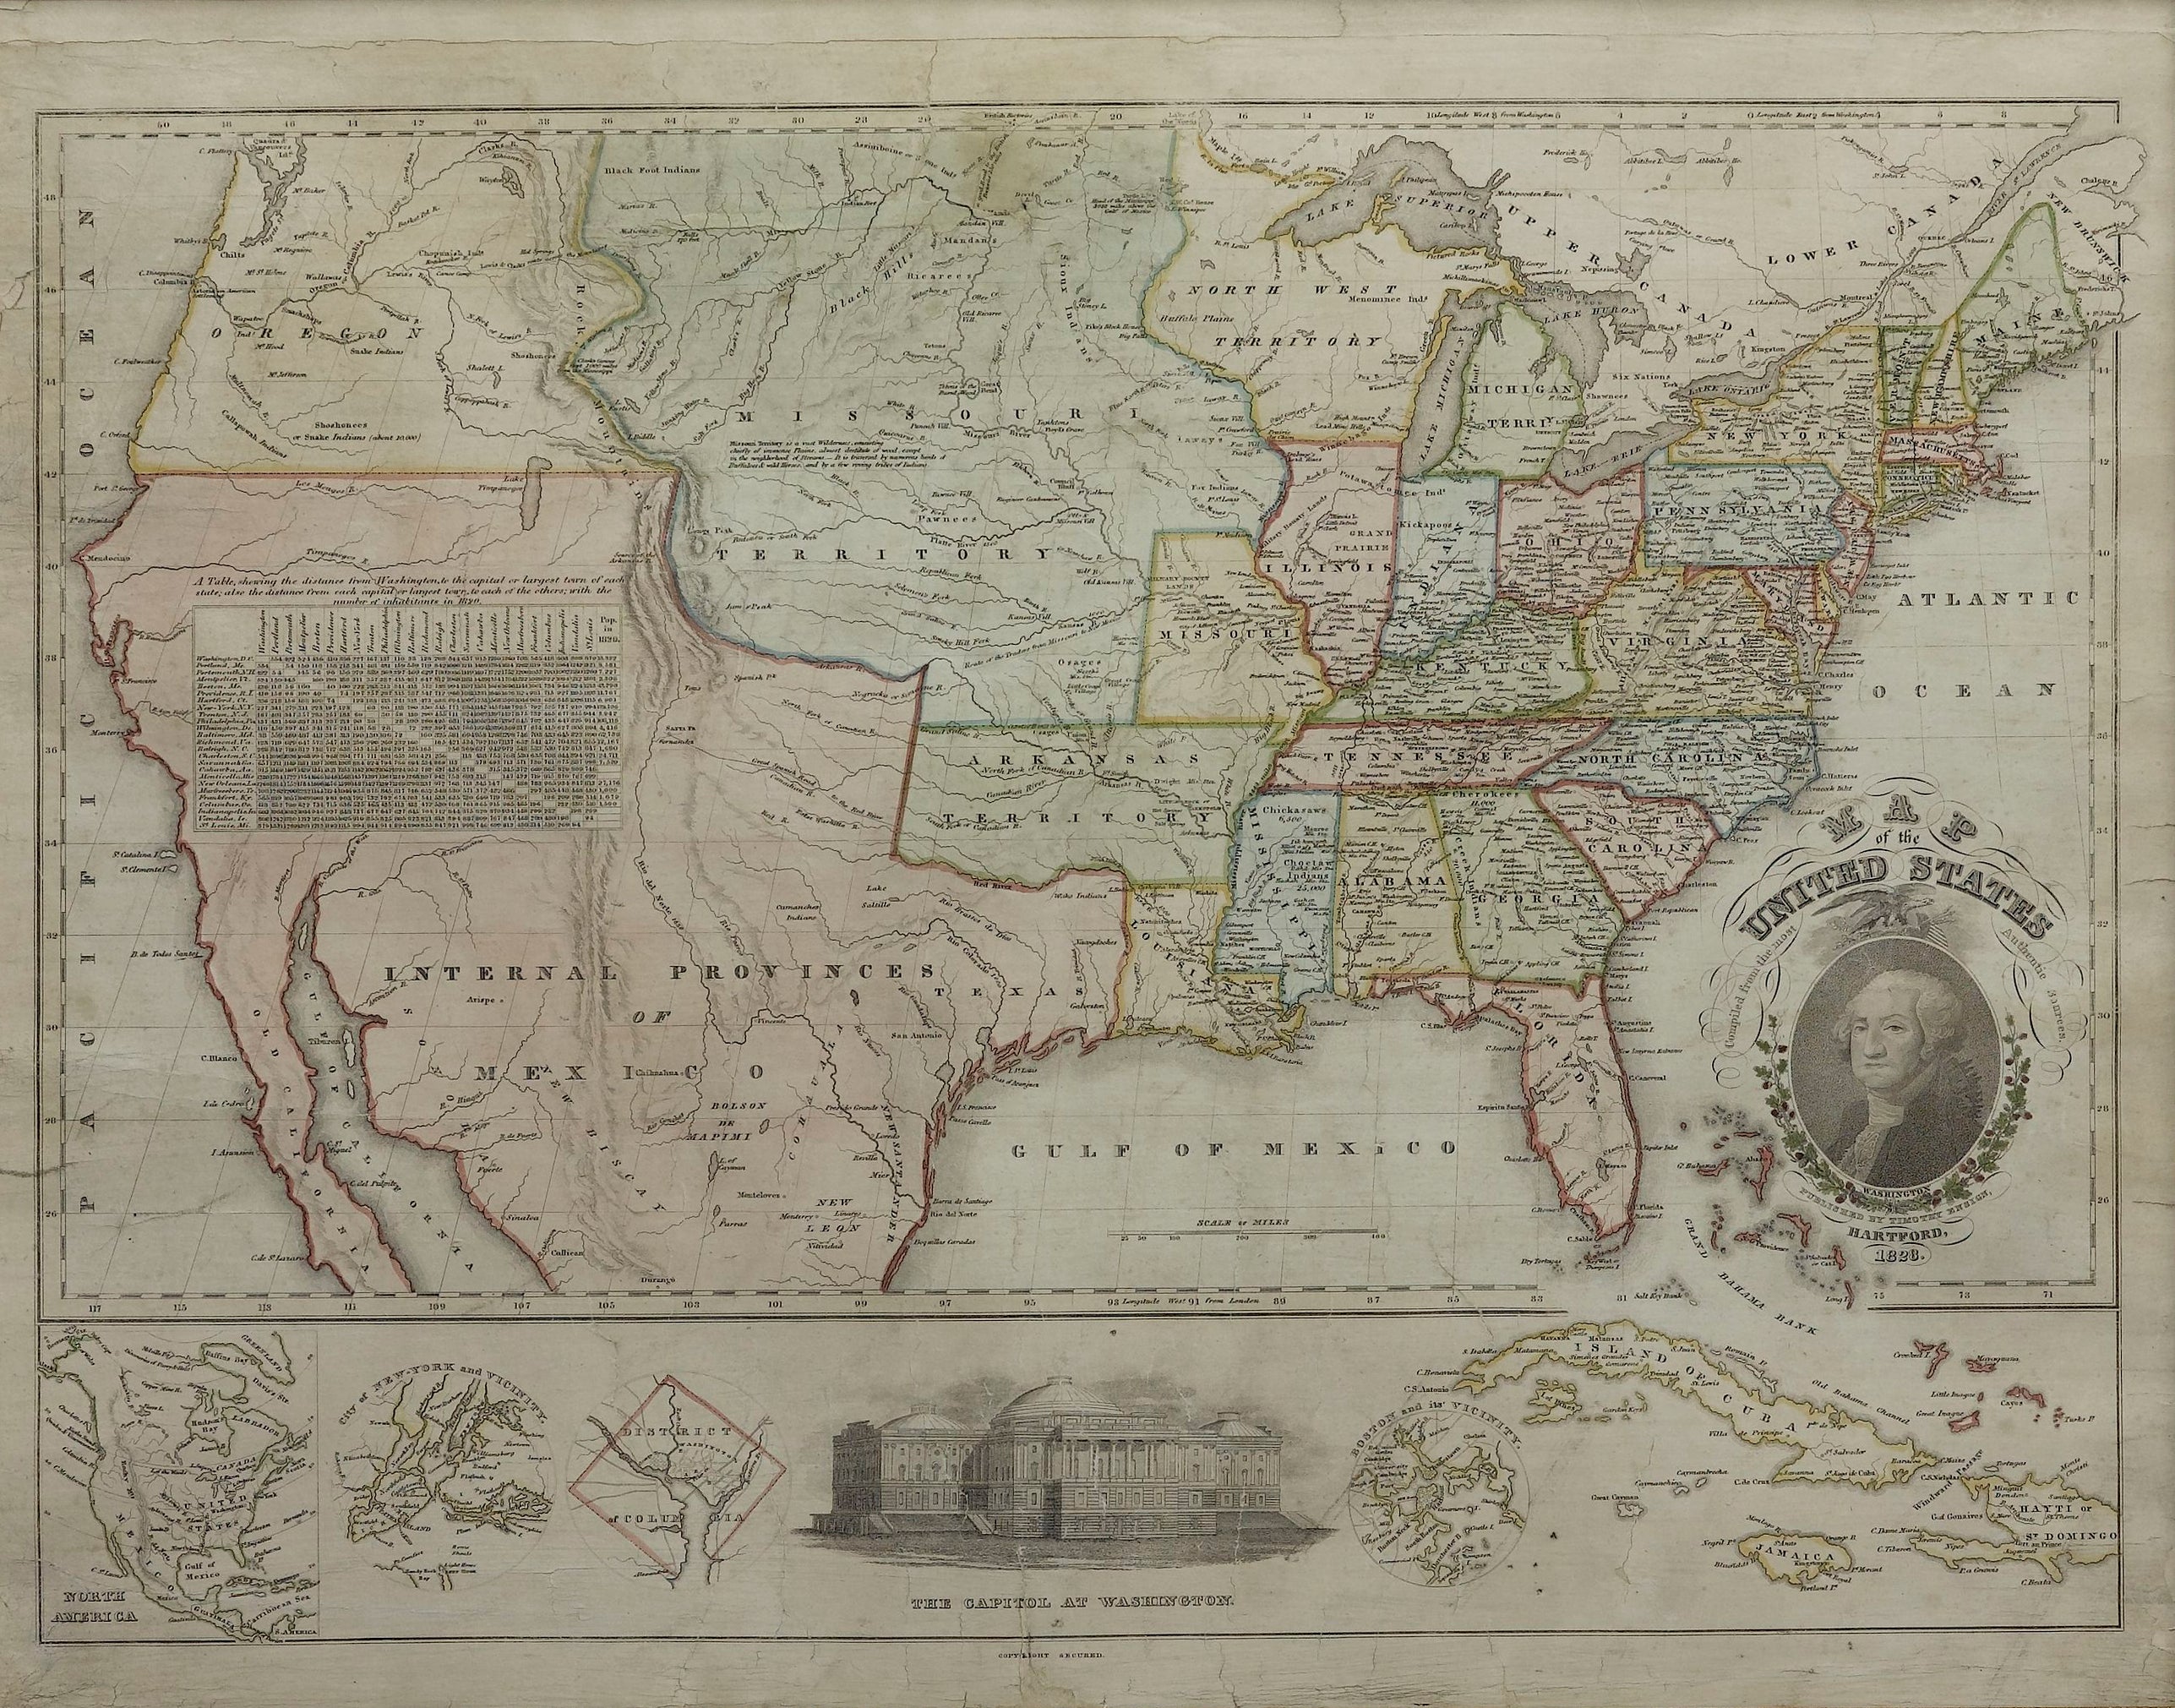 1828 "Map of the United States Compiled from the most Authentic Sources" by T. Ensign